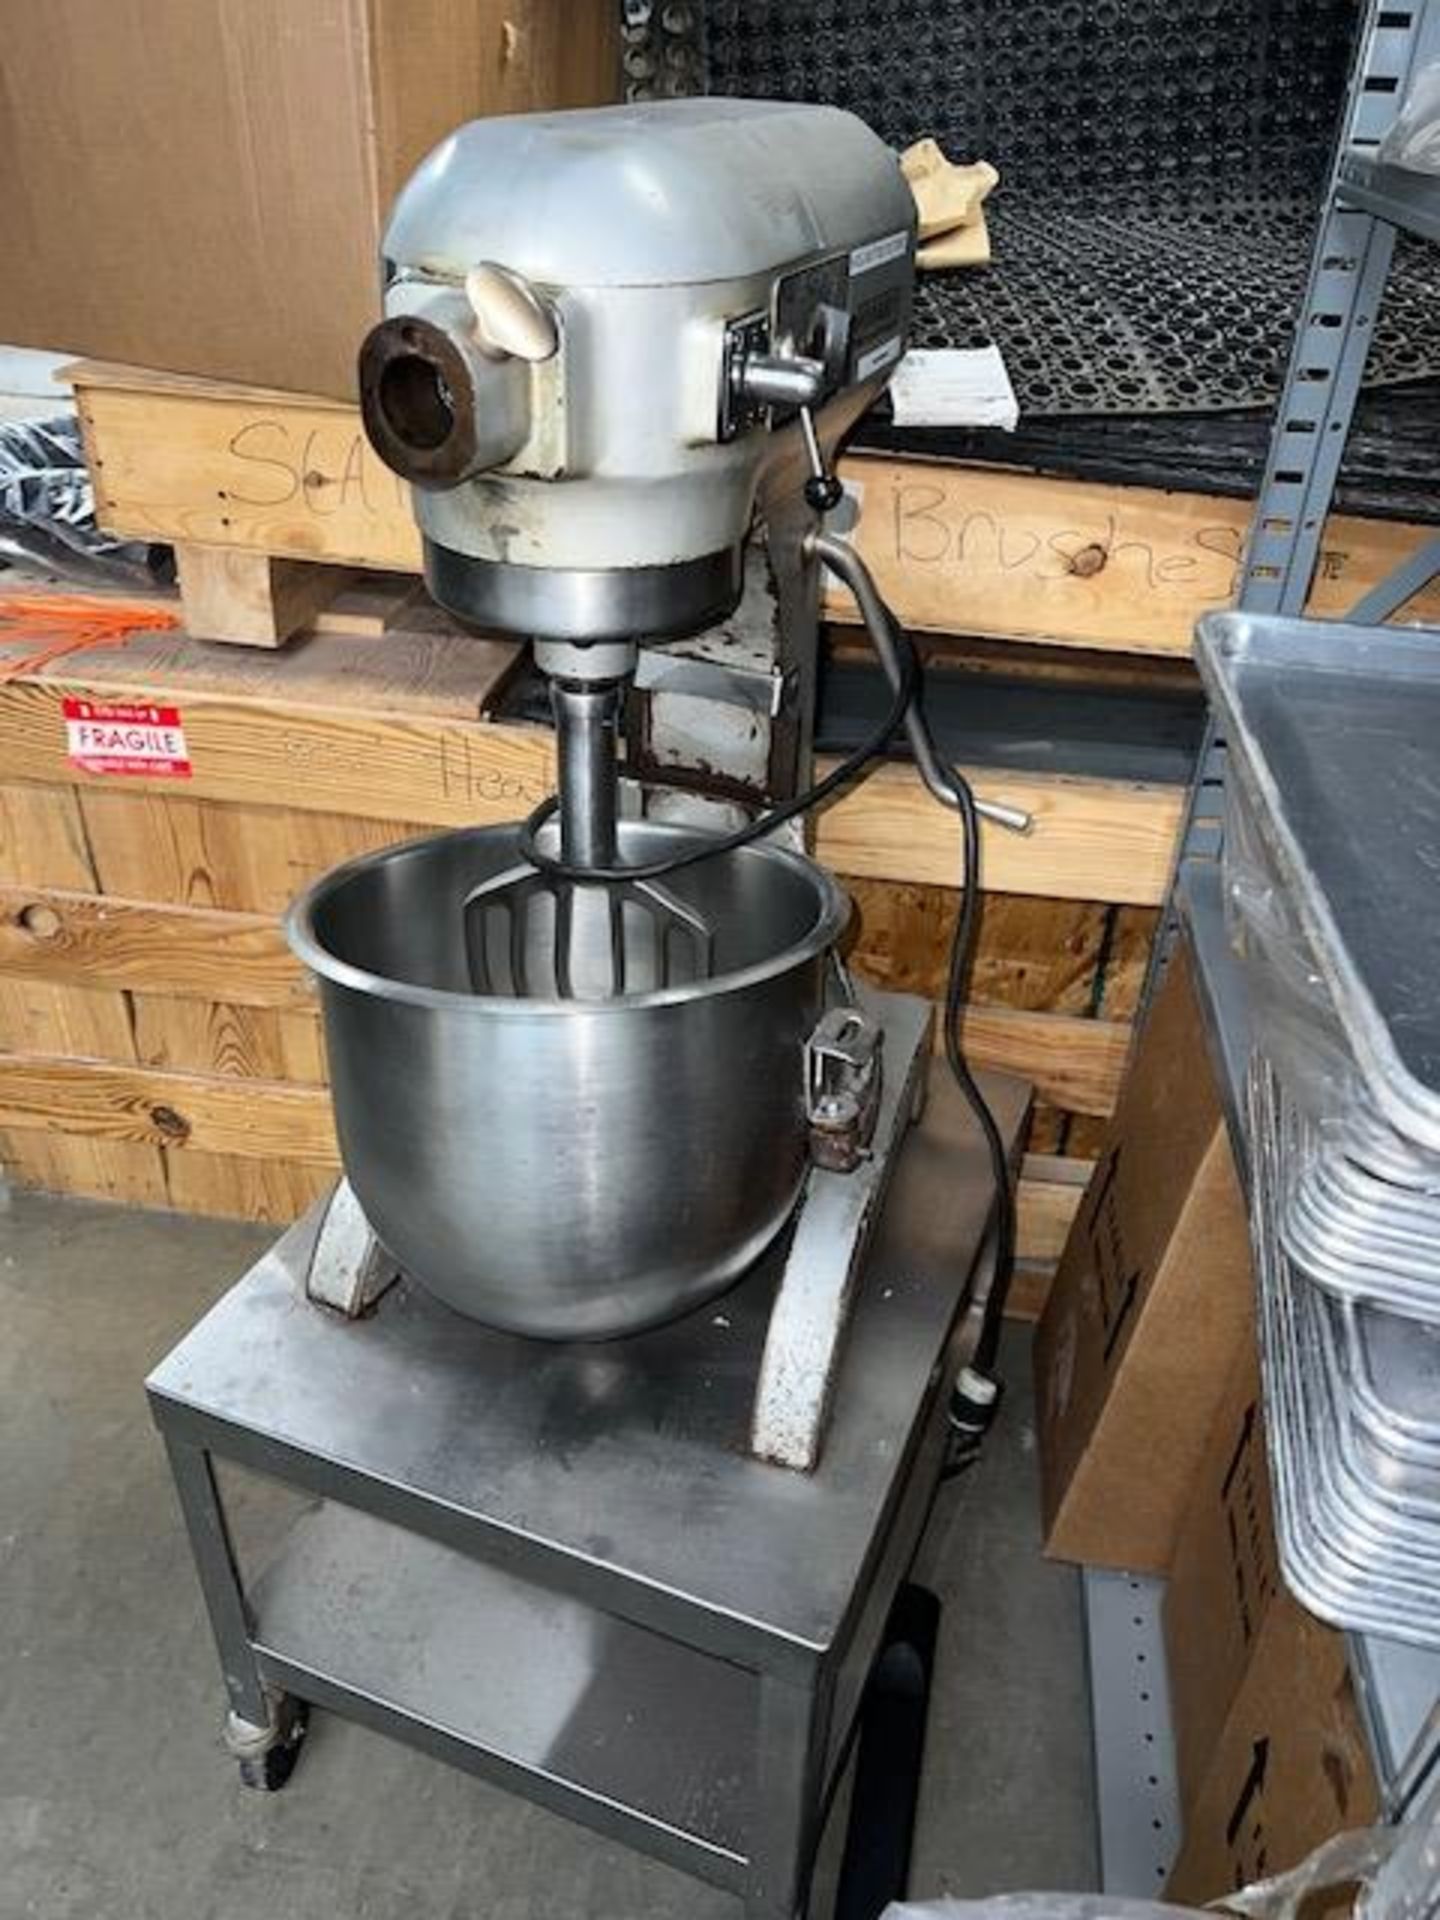 Asset 245 - Hobart 20 quart Mixer, Model A200 with stainless steel bowl and flat beater, 3 speed, - Image 2 of 5